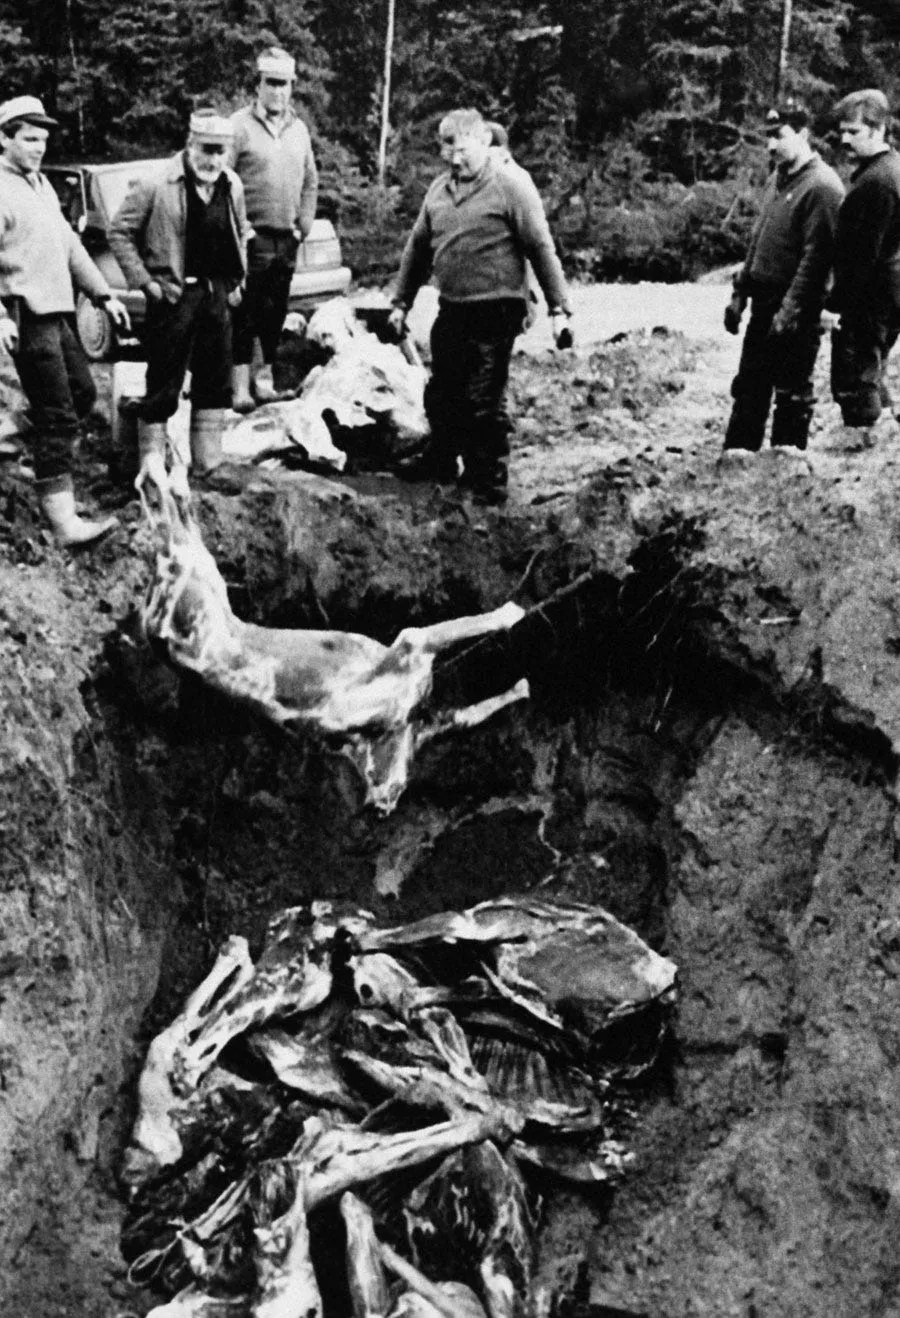 galsjo forest elk hunters fill a quarry in northern sweden with carcasses contaminated with radioactivity september 18 1986